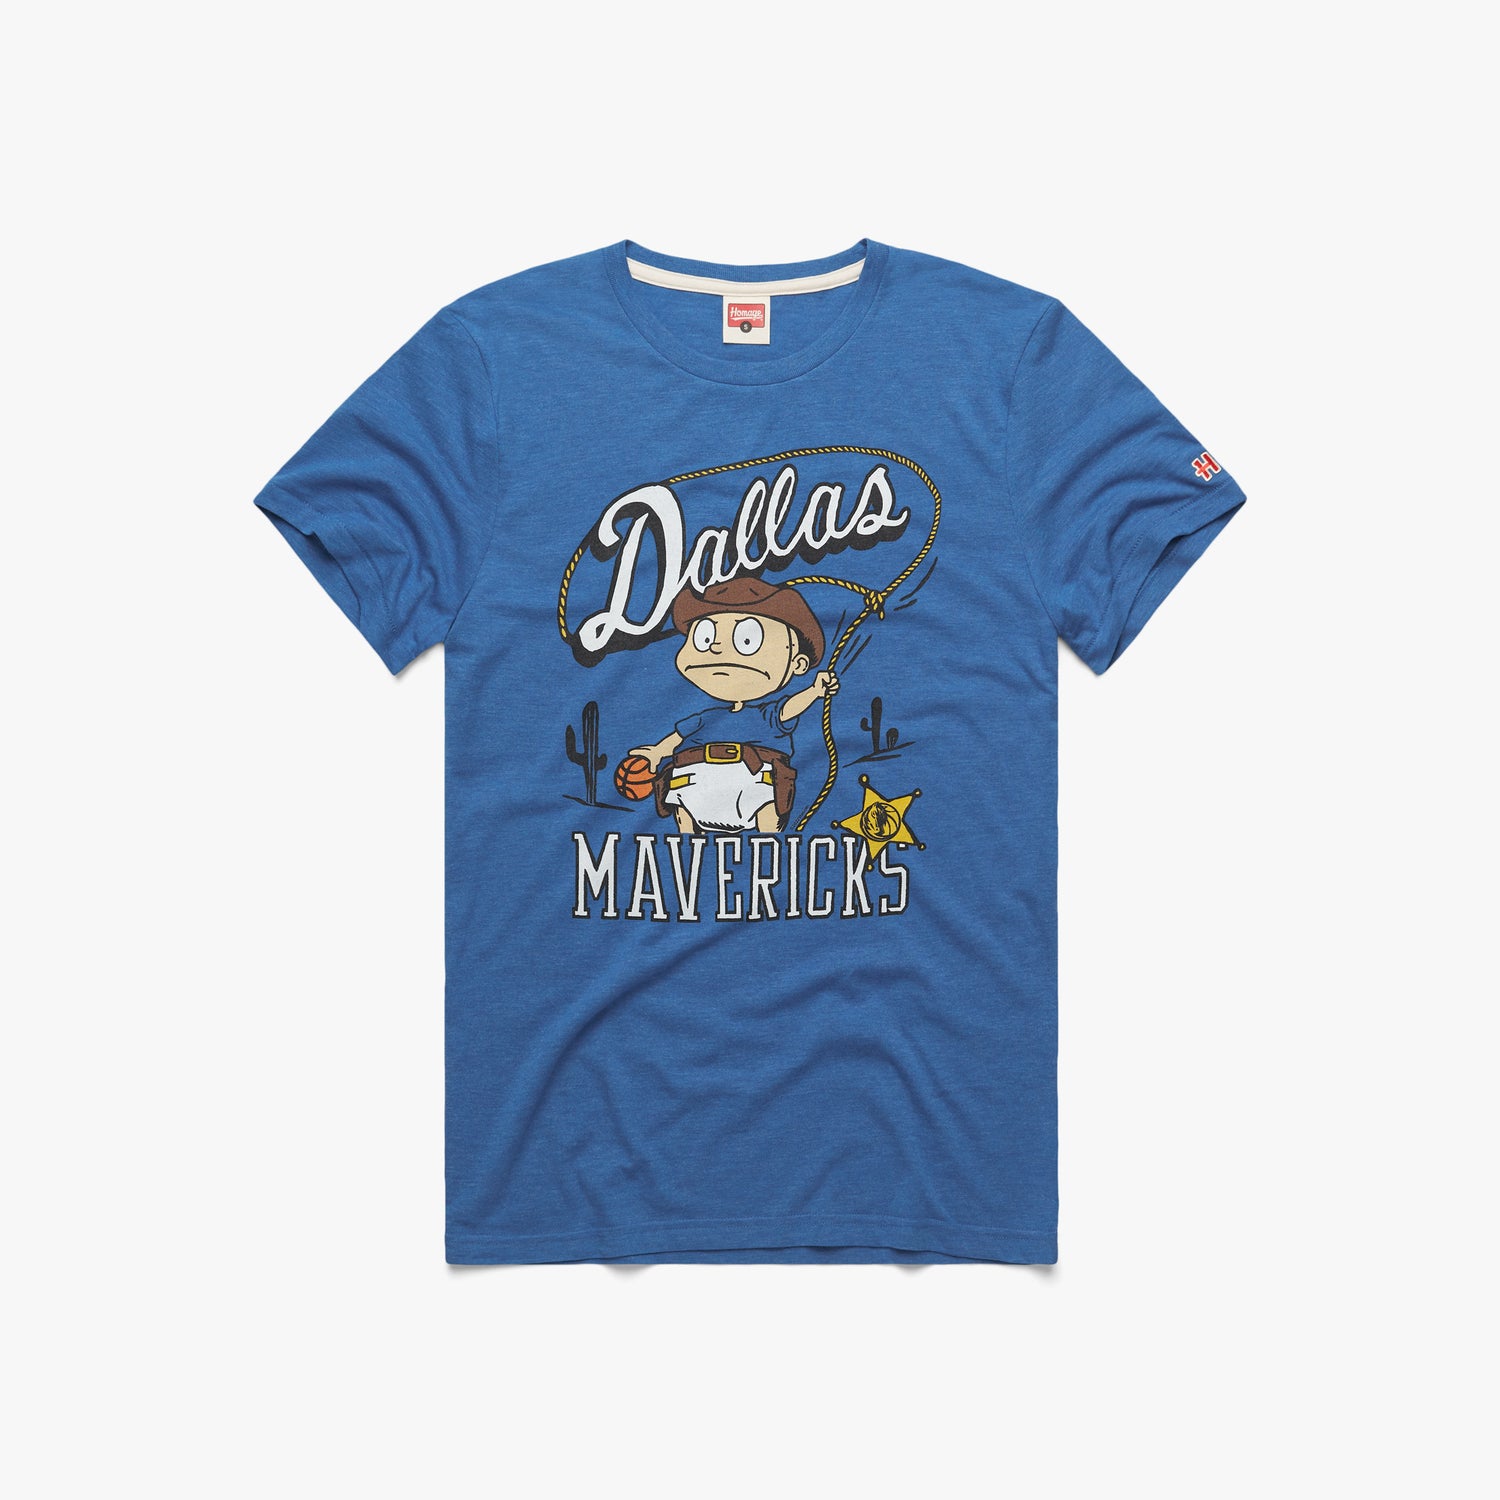 Rugrats Tommy x Dallas Mavericks T-Shirt from Homage | Blue | Retro Nickelodeon T-Shirt from Homage.